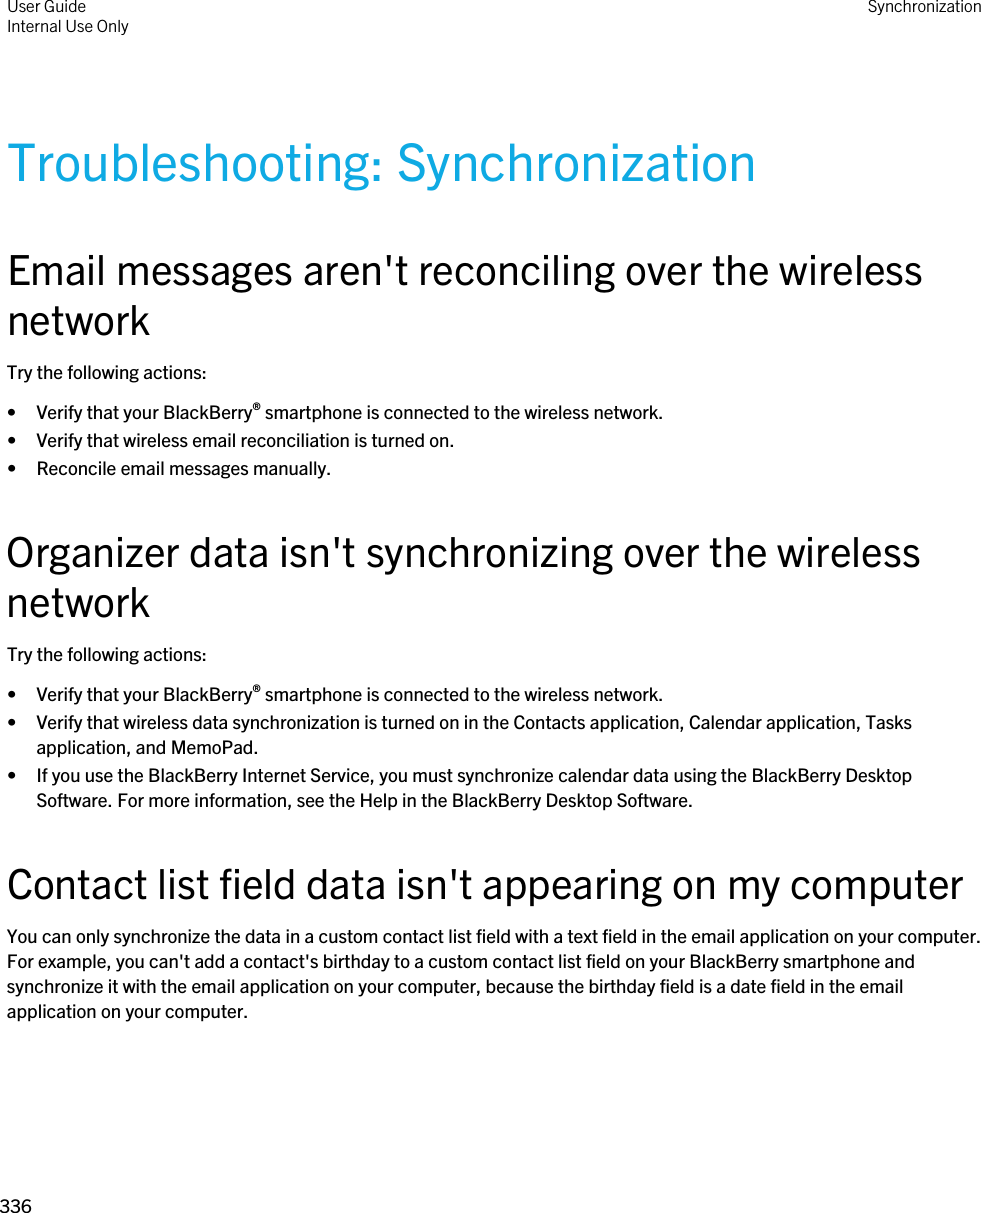 Troubleshooting: SynchronizationEmail messages aren&apos;t reconciling over the wireless networkTry the following actions:• Verify that your BlackBerry® smartphone is connected to the wireless network.• Verify that wireless email reconciliation is turned on.• Reconcile email messages manually.Organizer data isn&apos;t synchronizing over the wireless networkTry the following actions:• Verify that your BlackBerry® smartphone is connected to the wireless network.• Verify that wireless data synchronization is turned on in the Contacts application, Calendar application, Tasks application, and MemoPad.• If you use the BlackBerry Internet Service, you must synchronize calendar data using the BlackBerry Desktop Software. For more information, see the Help in the BlackBerry Desktop Software.Contact list field data isn&apos;t appearing on my computerYou can only synchronize the data in a custom contact list field with a text field in the email application on your computer. For example, you can&apos;t add a contact&apos;s birthday to a custom contact list field on your BlackBerry smartphone and synchronize it with the email application on your computer, because the birthday field is a date field in the email application on your computer.User GuideInternal Use Only Synchronization336 